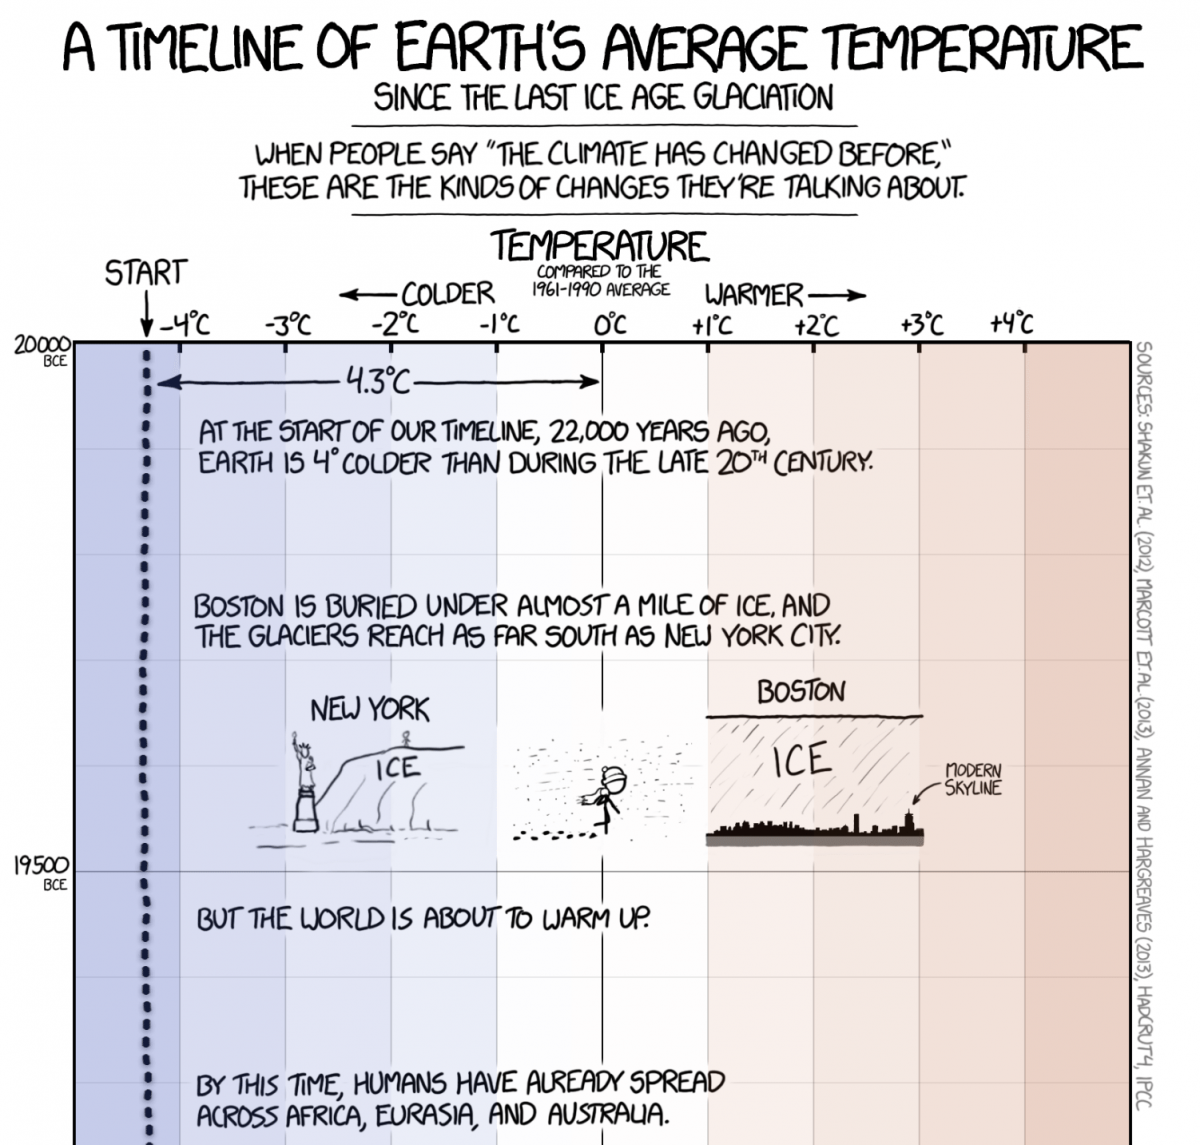 Illustration graph of the very beginning of "a timeline of earth's average temperature since the last ice age glaciation." The chart shows that "at the start of our timeline 22,000 years ago, earth is 4 degrees colder than during the late 20th century," and "Boston is buried under almost a mile of ice and the glaciers reach as far south as New York City." It includes illustrations that demonstrate those statements of Boston and New York with an image of the state of liberty next to a large glacier, and the boston skyline in front of the wall of ice.